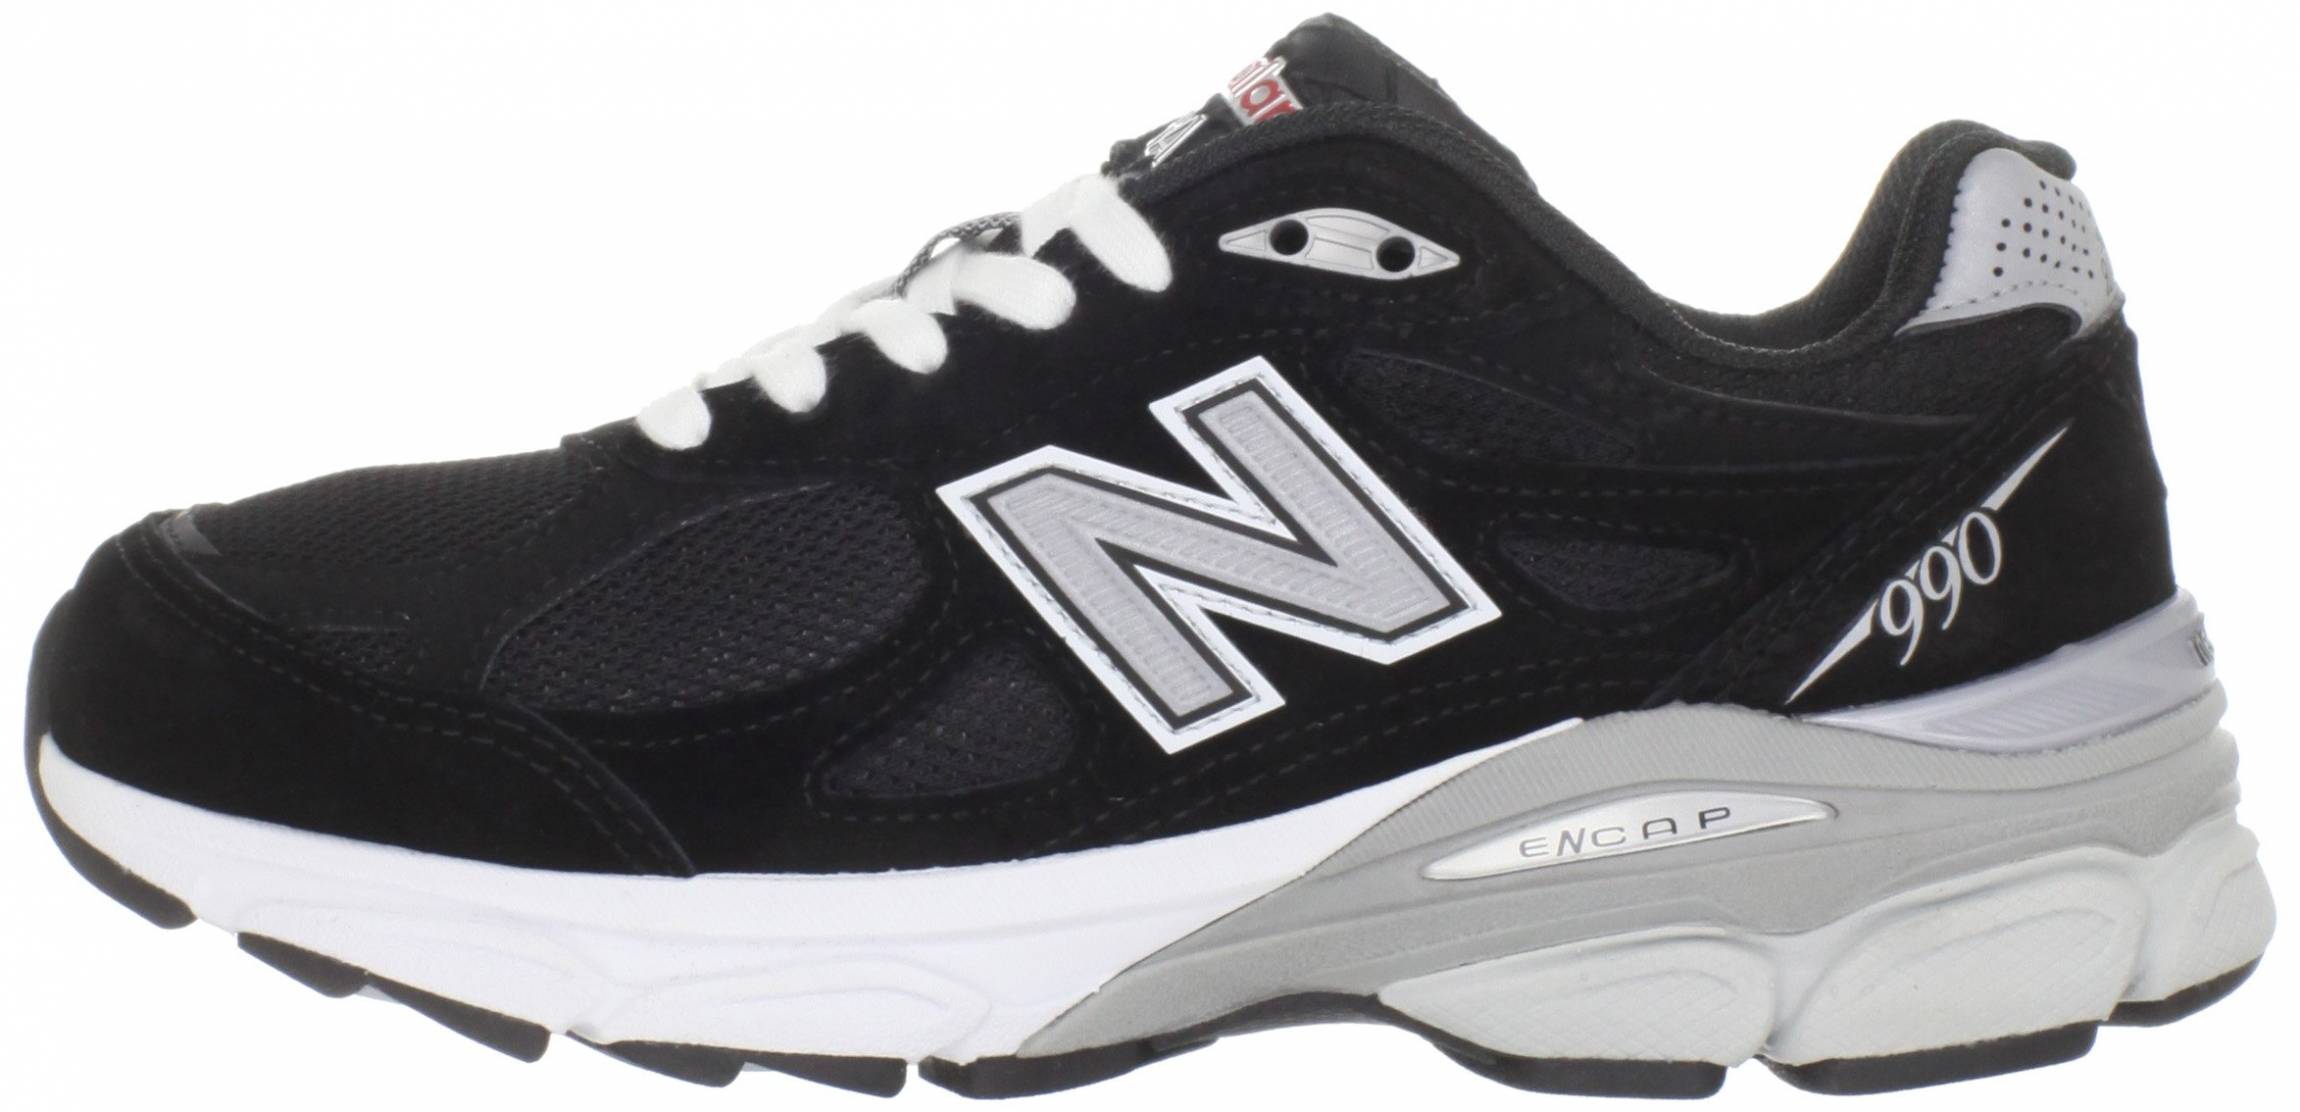 New Balance 990 sneakers (only $130) | RunRepeat